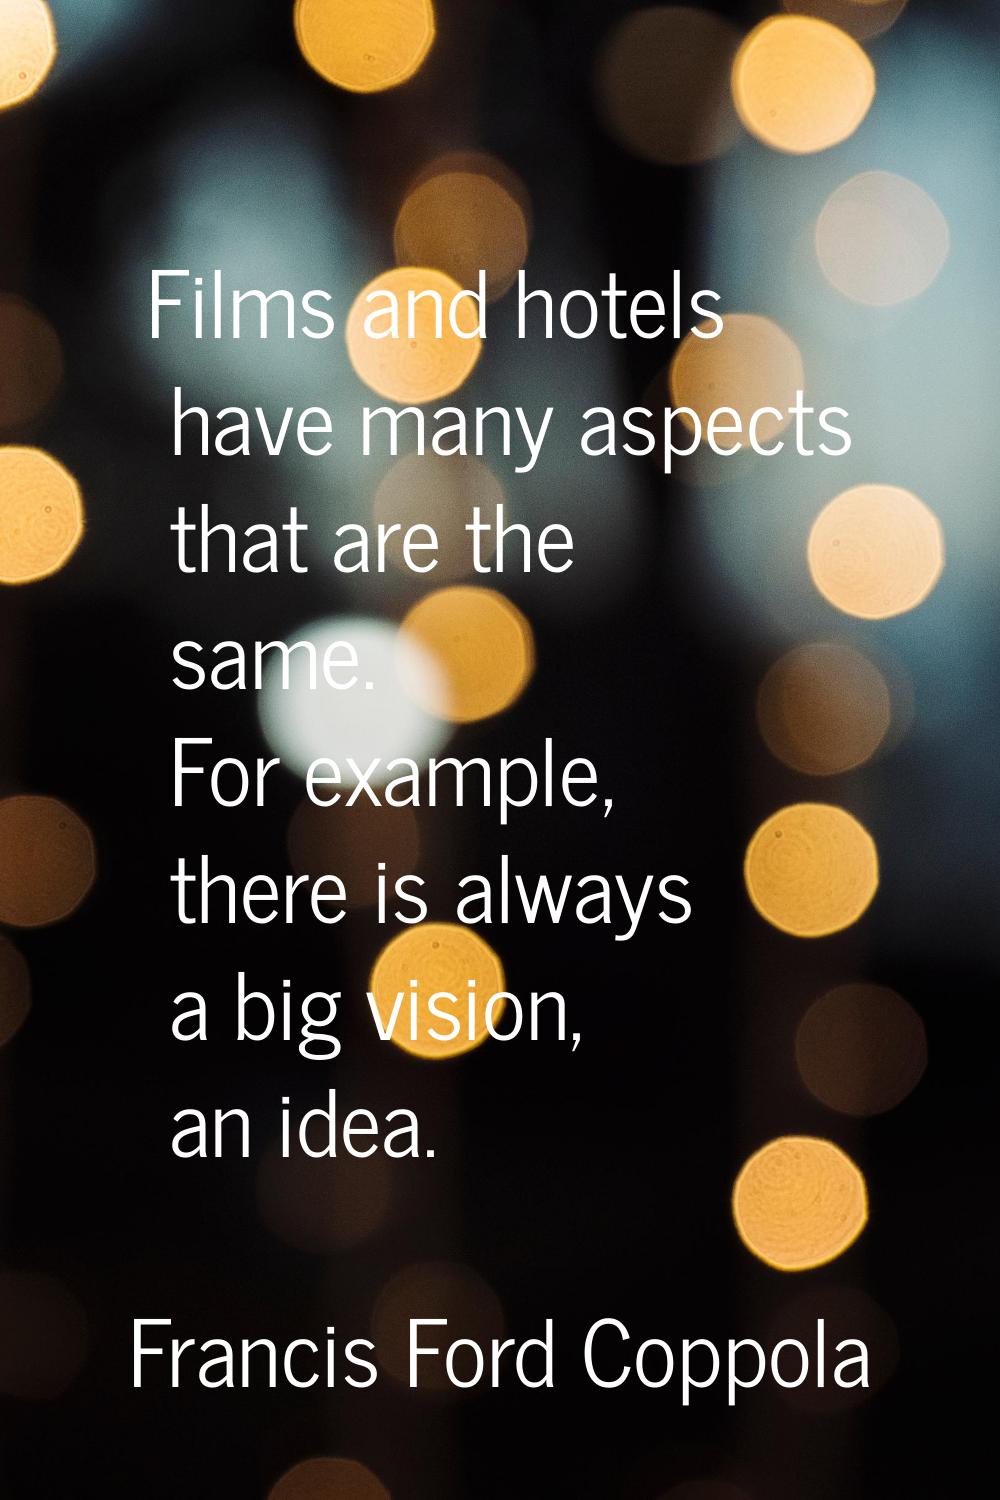 Films and hotels have many aspects that are the same. For example, there is always a big vision, an